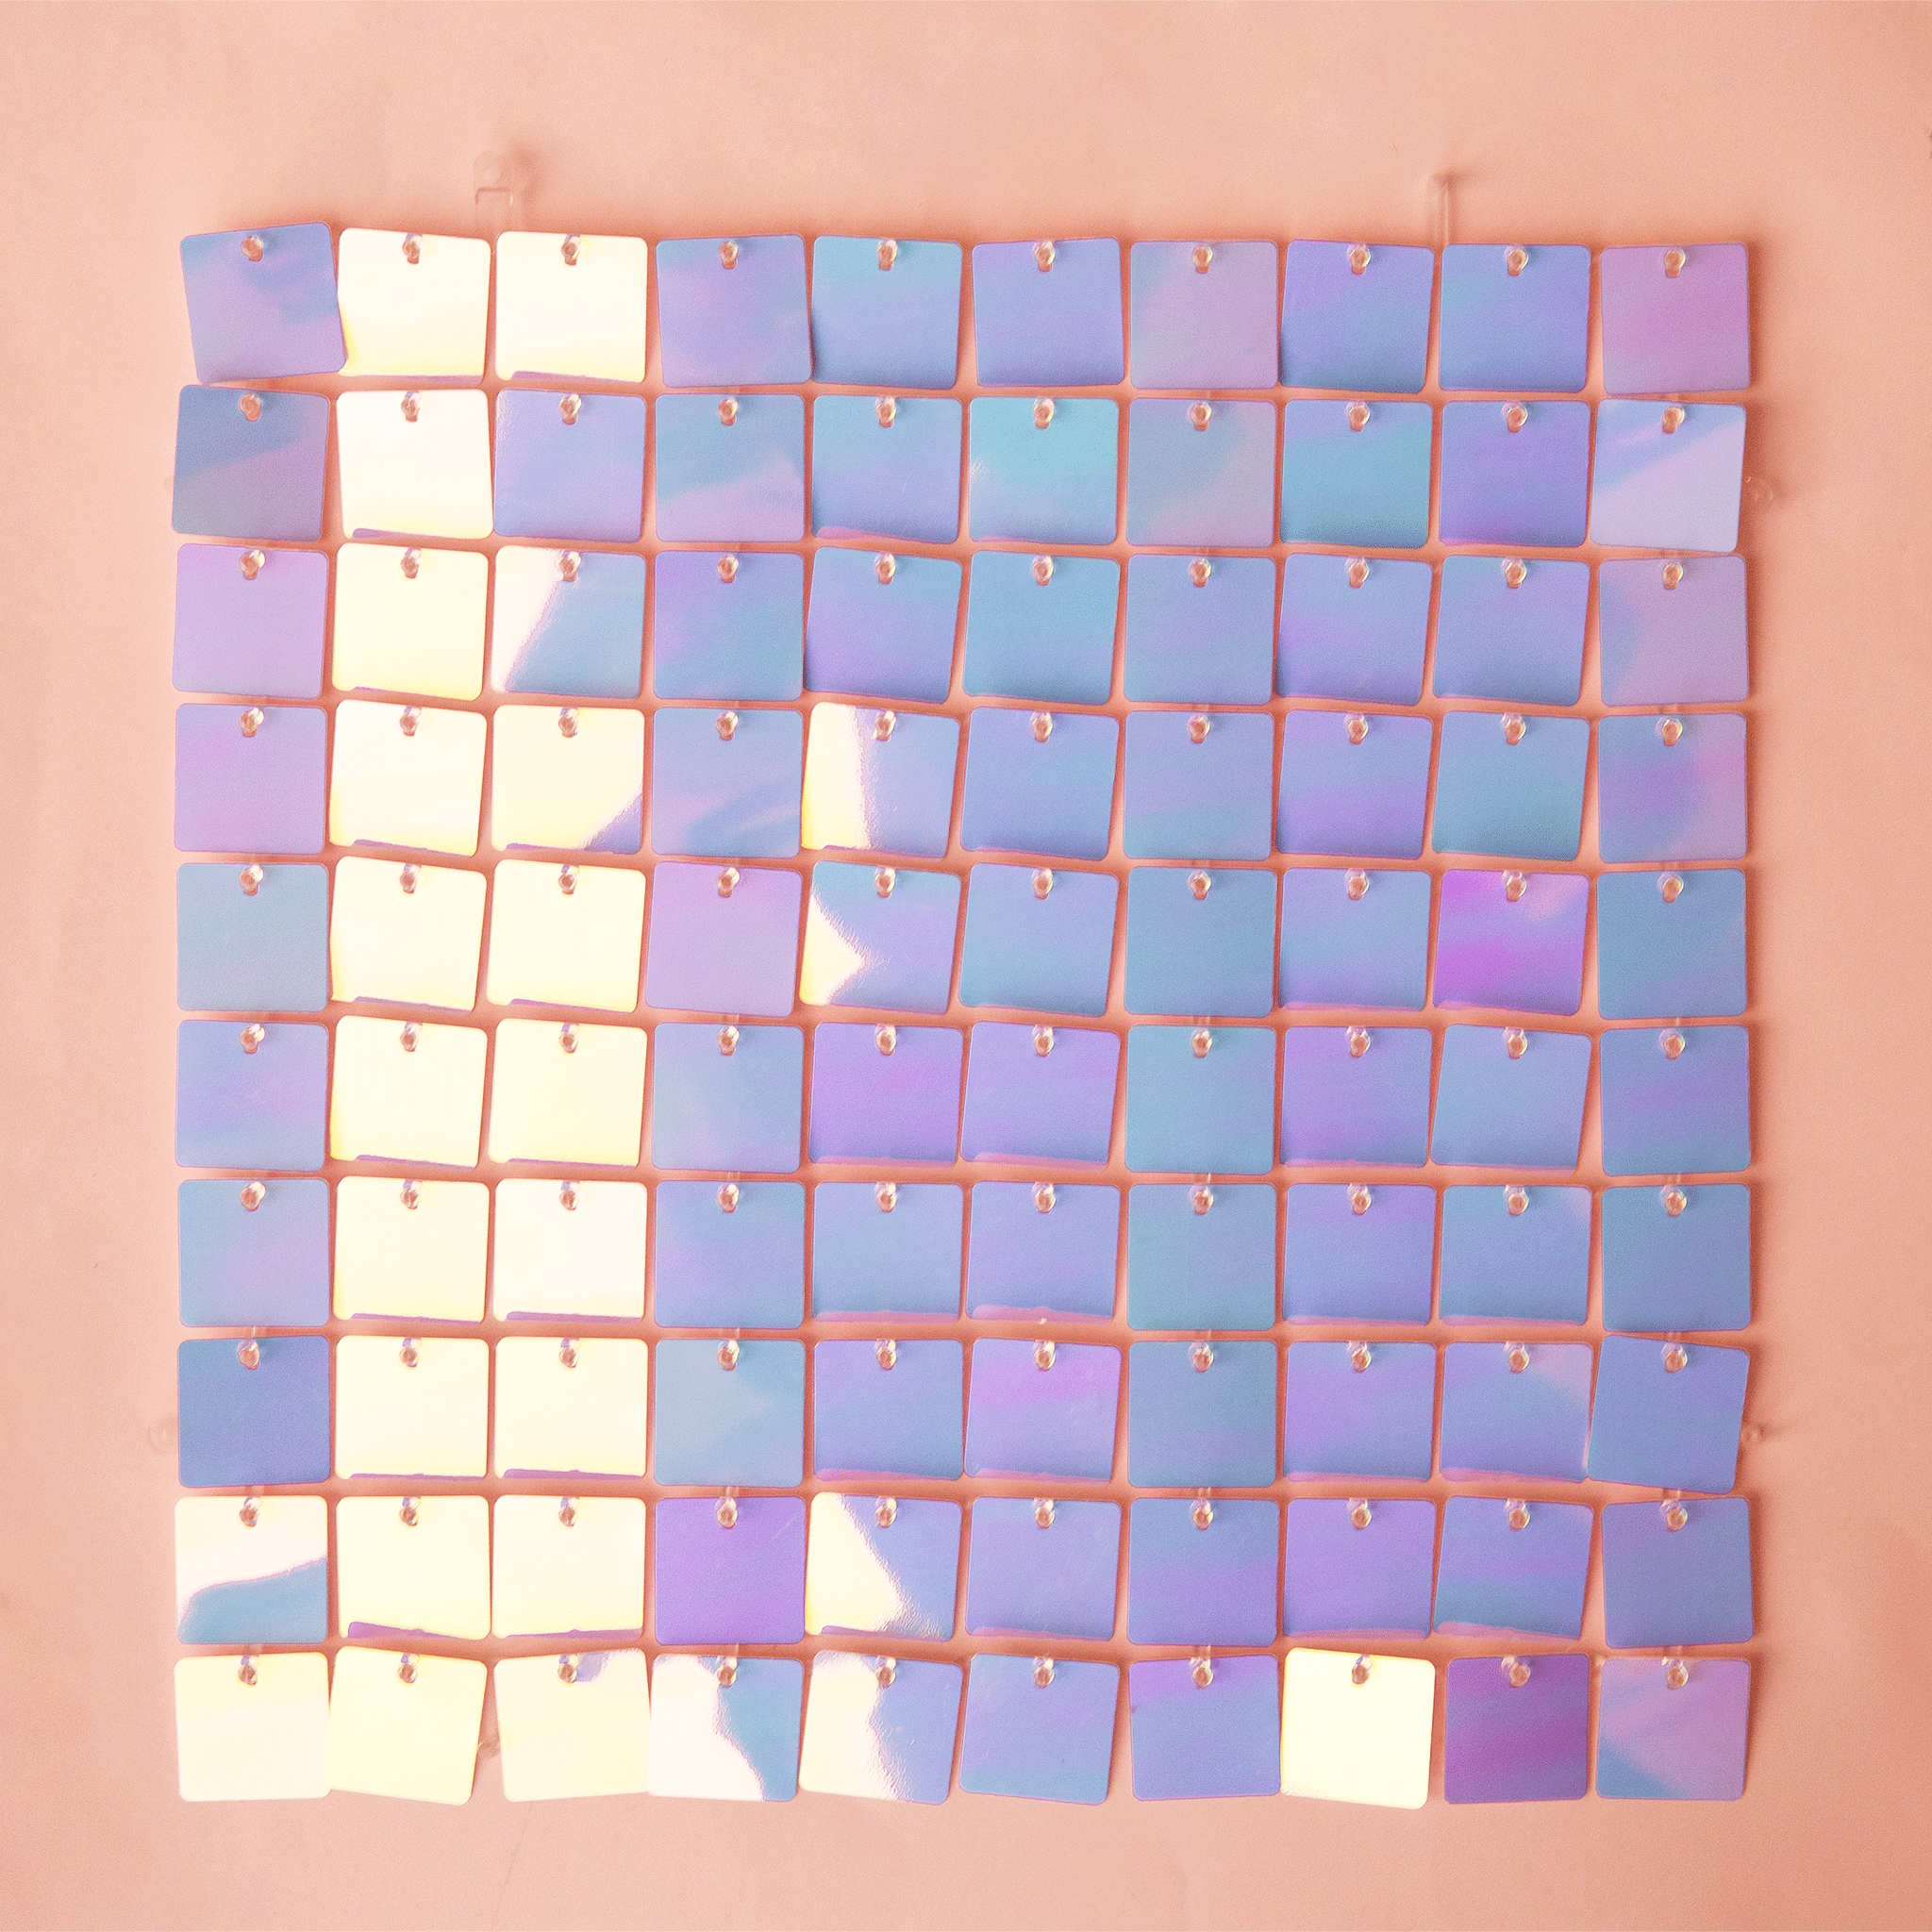 On a peachy background is a purple/blue shiny decorative wall panel.